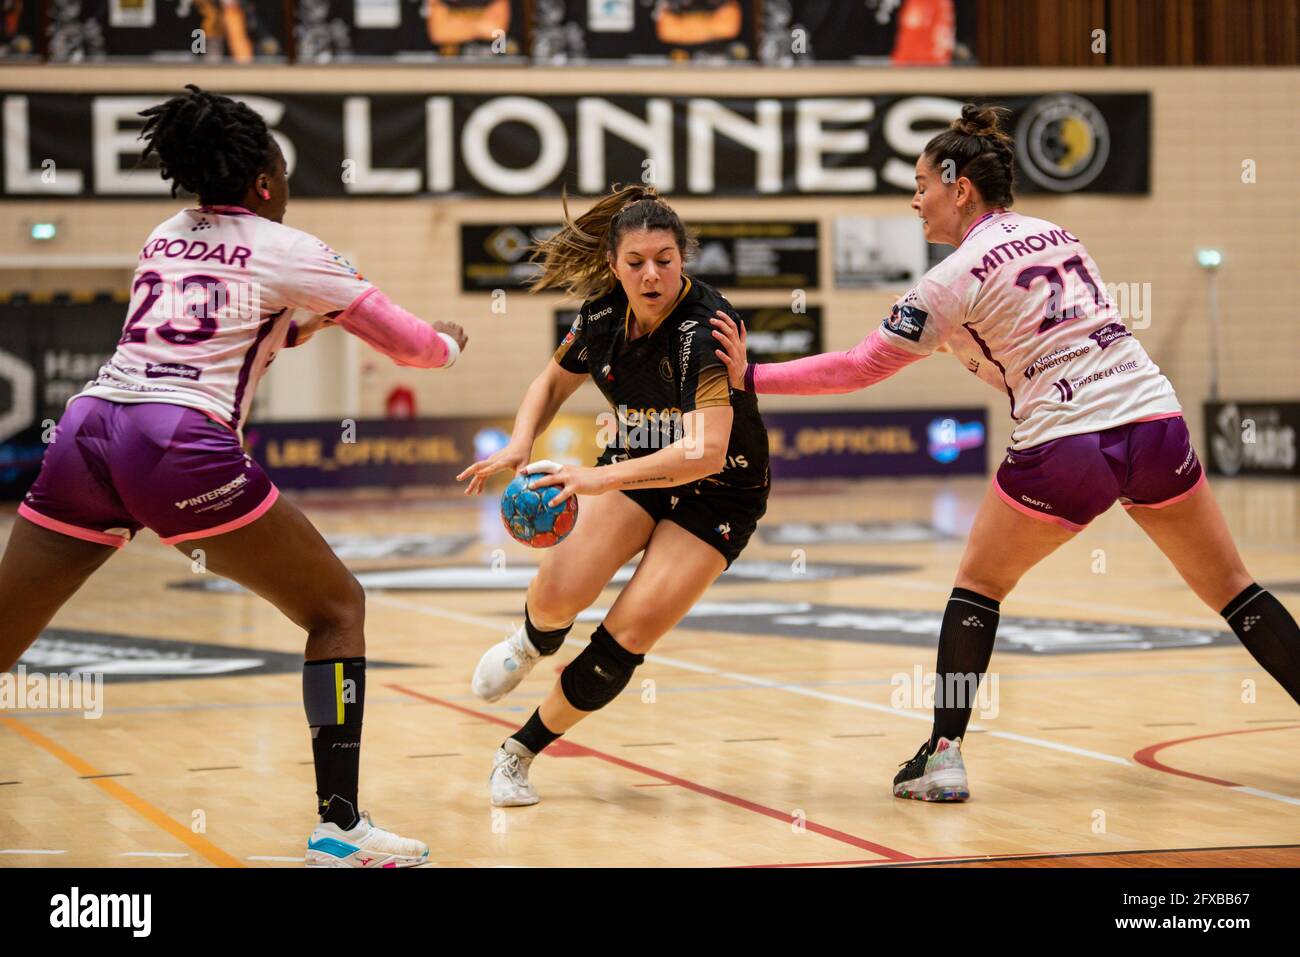 Laura Flippes of Paris 92 and Gordana Mitrovic of Nantes Atlantique Handball  fight for the ball during the Women's French championship, Ligue Butagaz  Energie, Final 5vs6, 1st leg between Paris 92 and